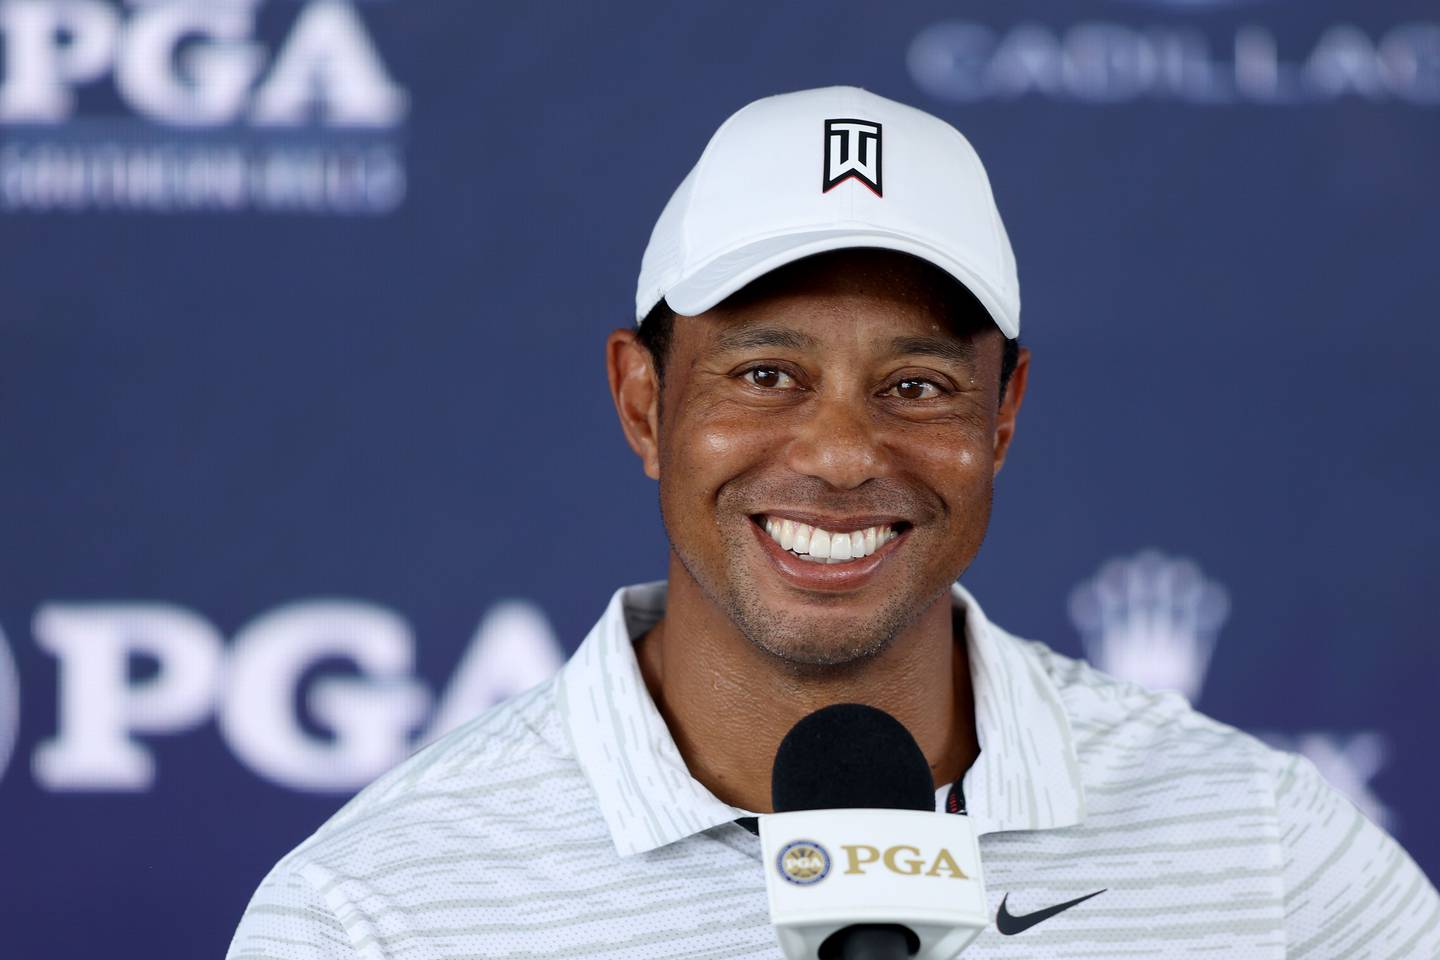 Tiger Woods speaks during a press conference ahead of the 2022 PGA Championship. AFP